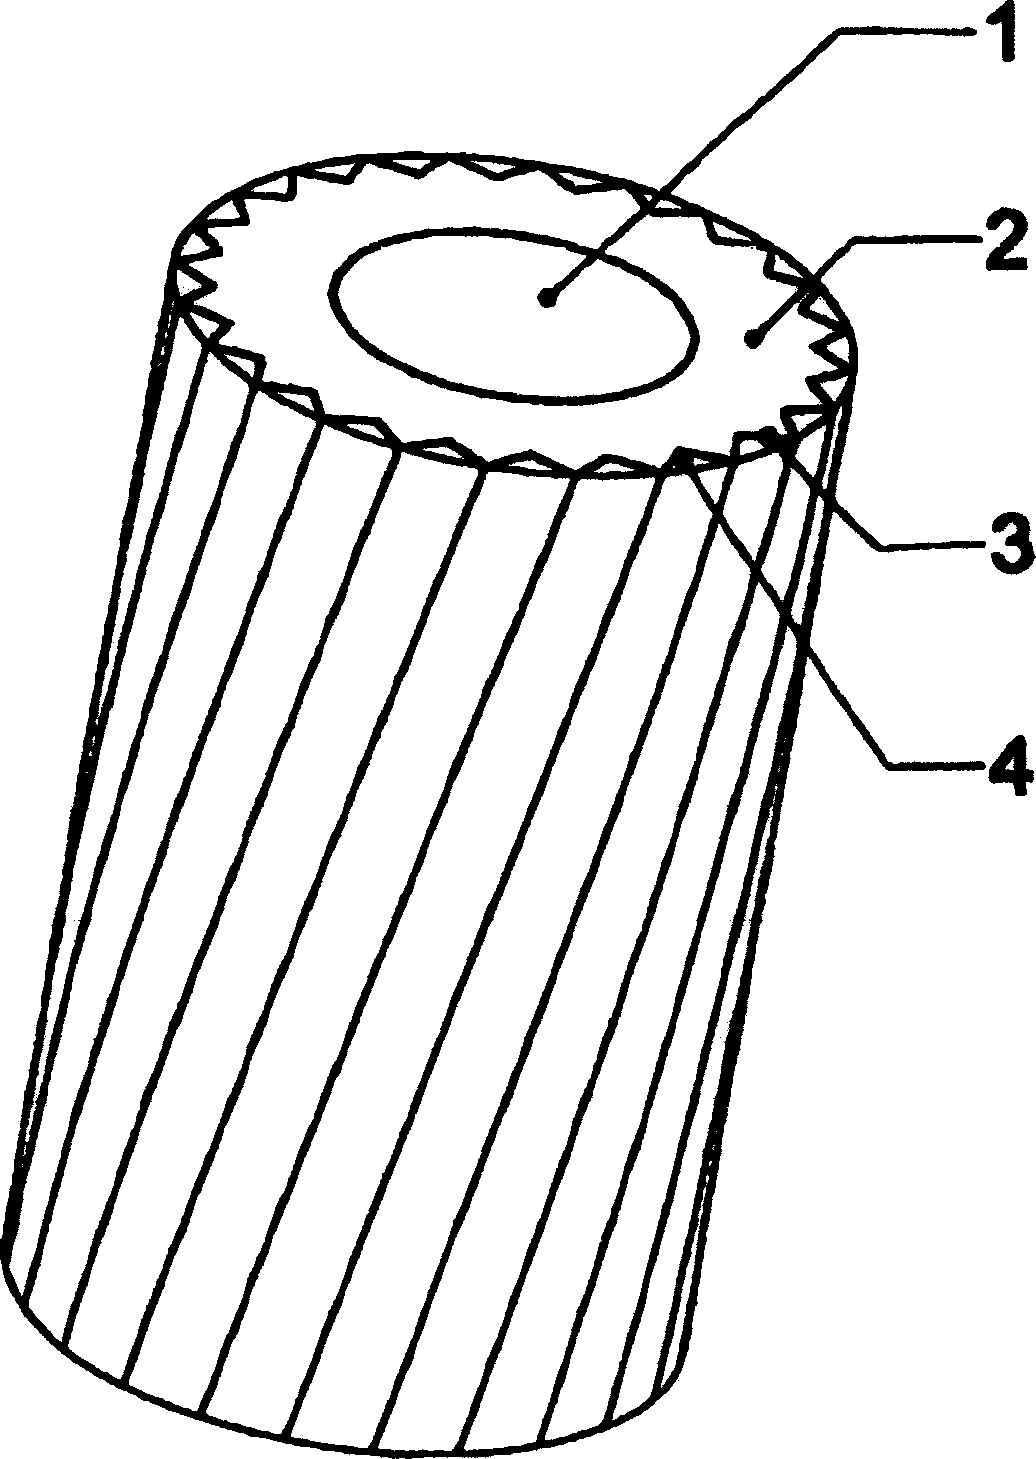 Welding electrode with structural surface